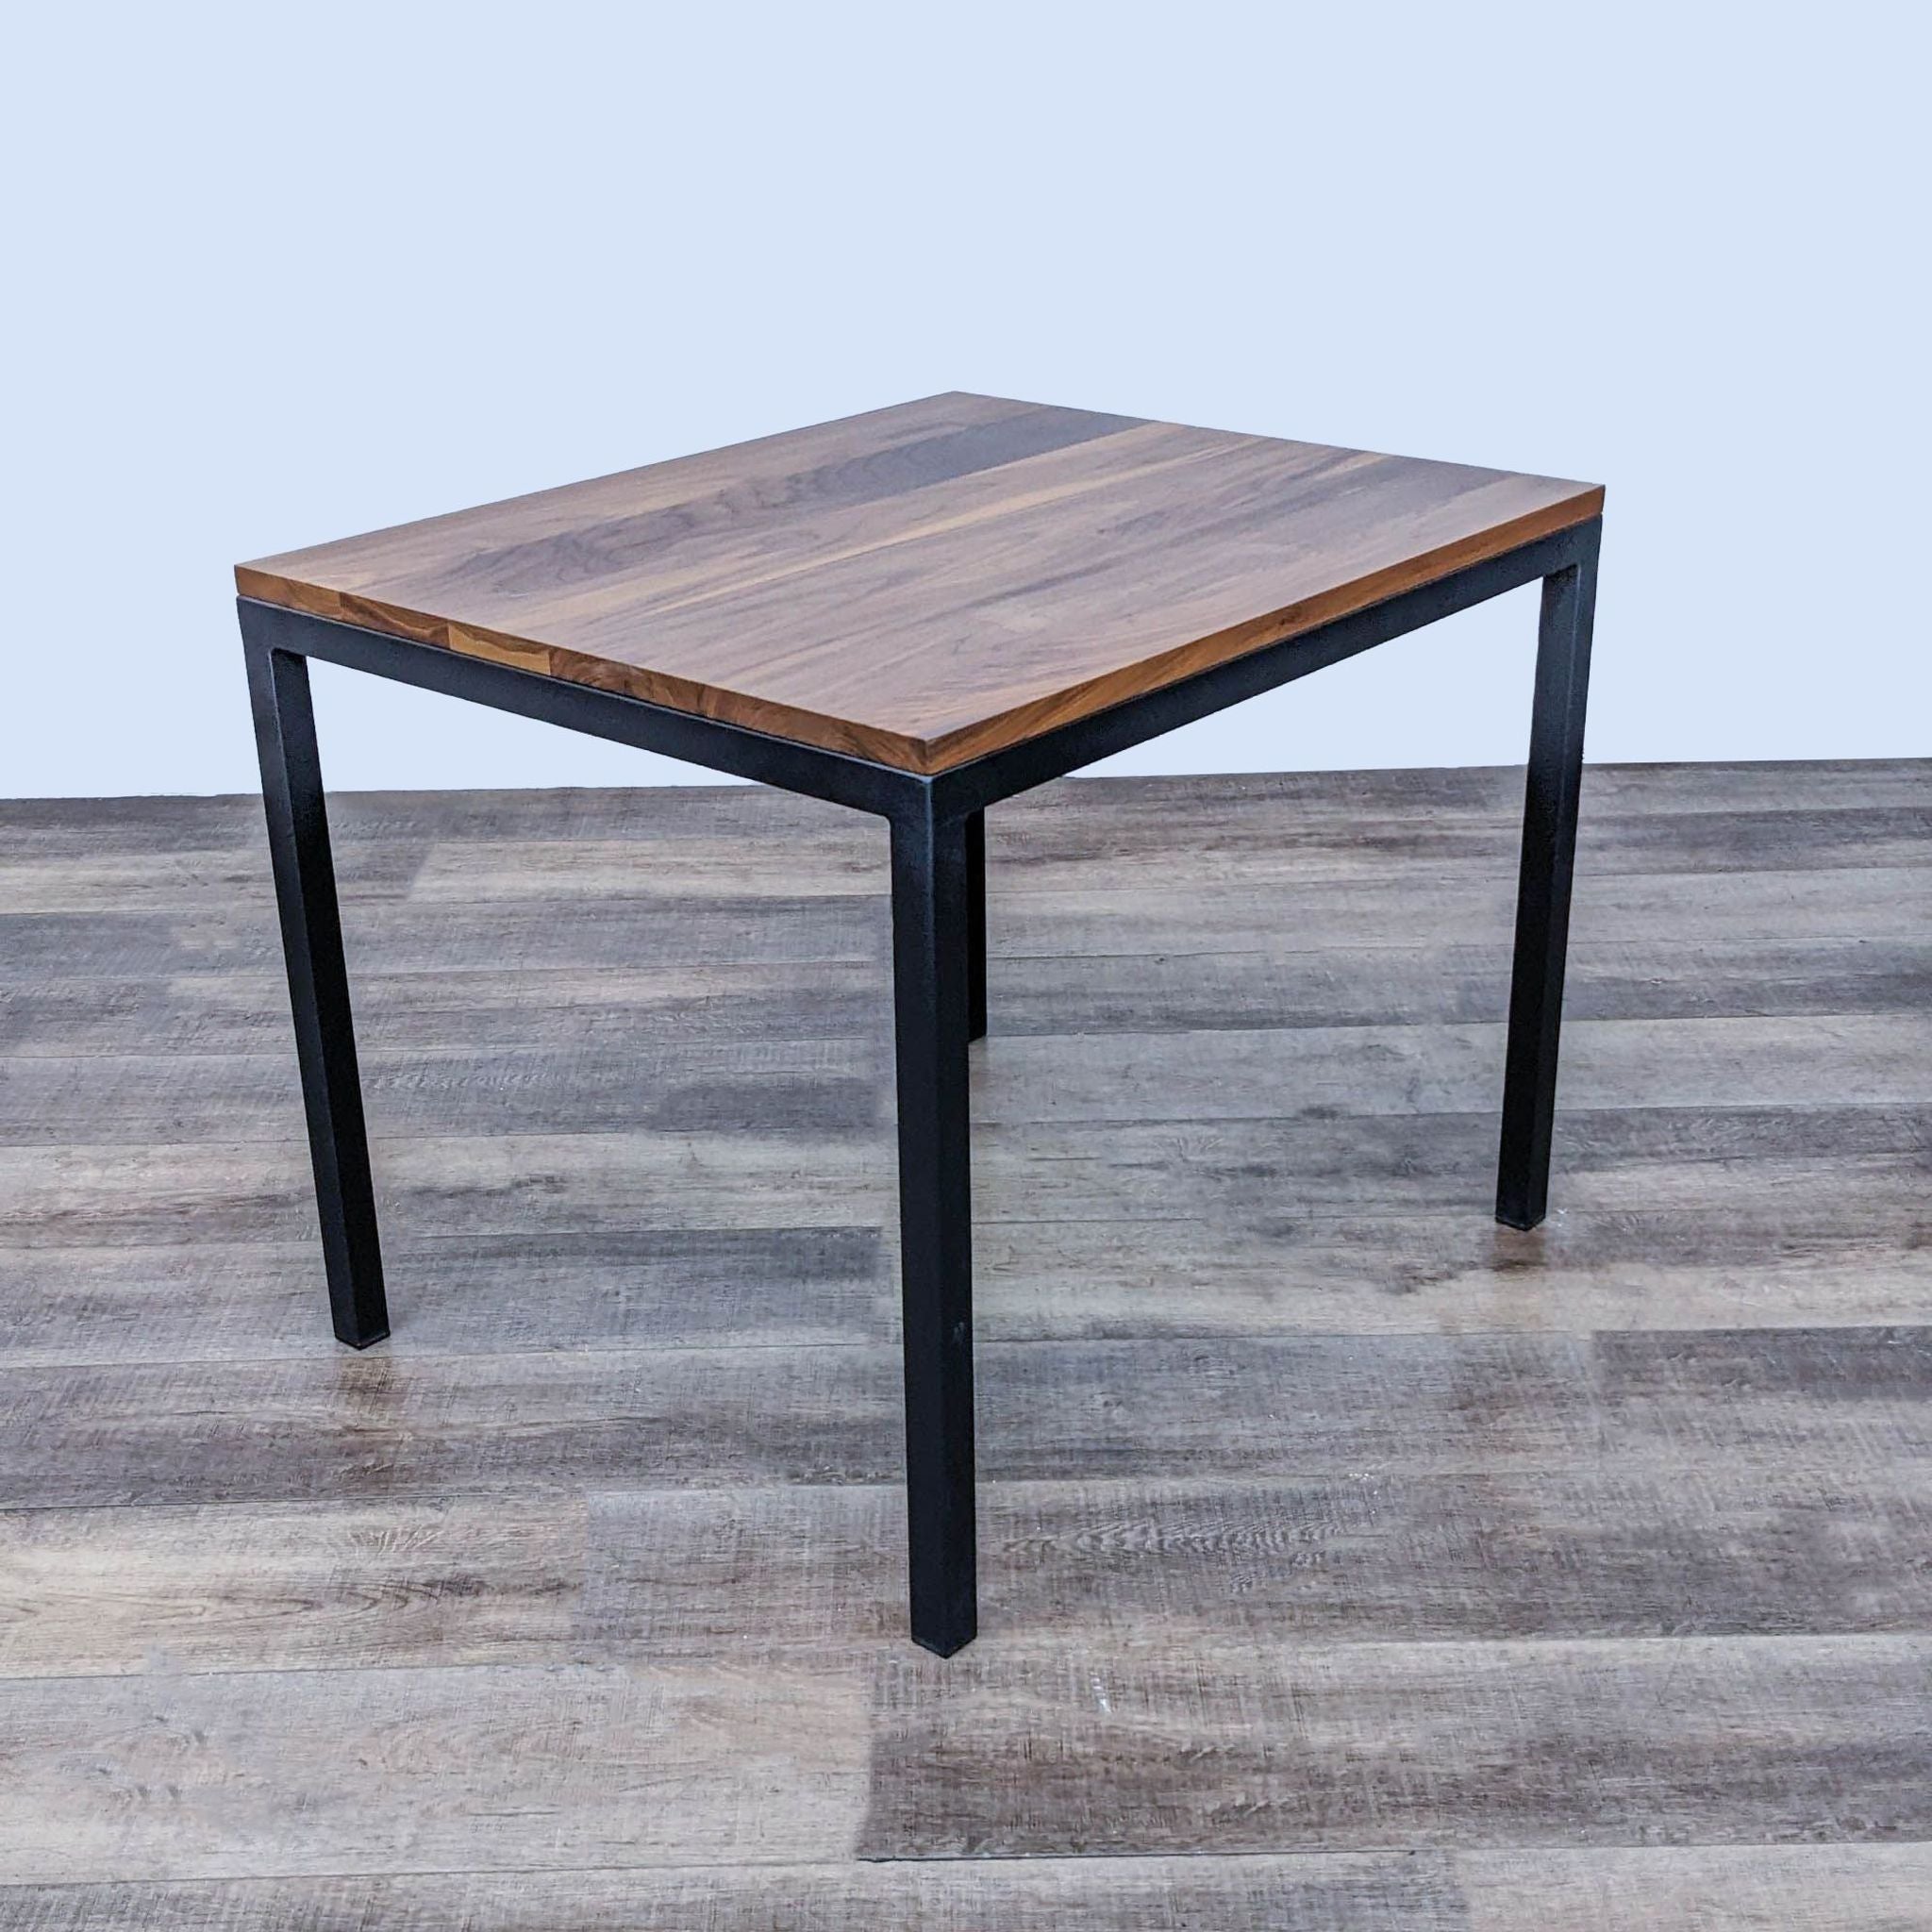 Room & Board brand Parsons dining table with solid walnut surface and welded steel legs.